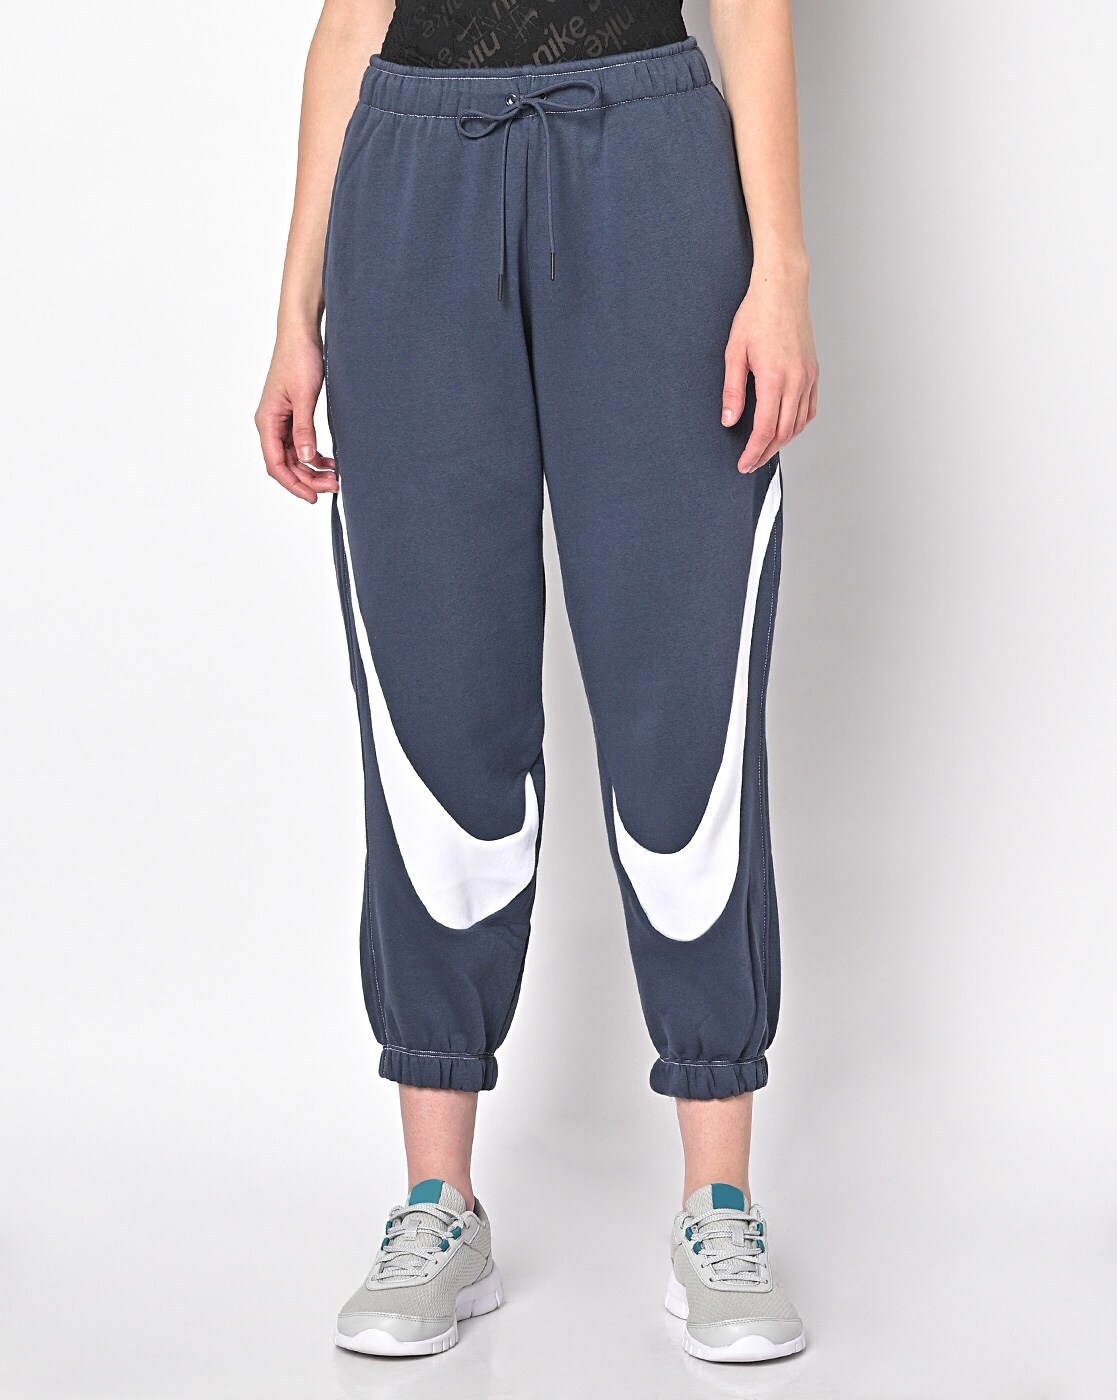 Buy Blue Track Pants for Women by NIKE Online